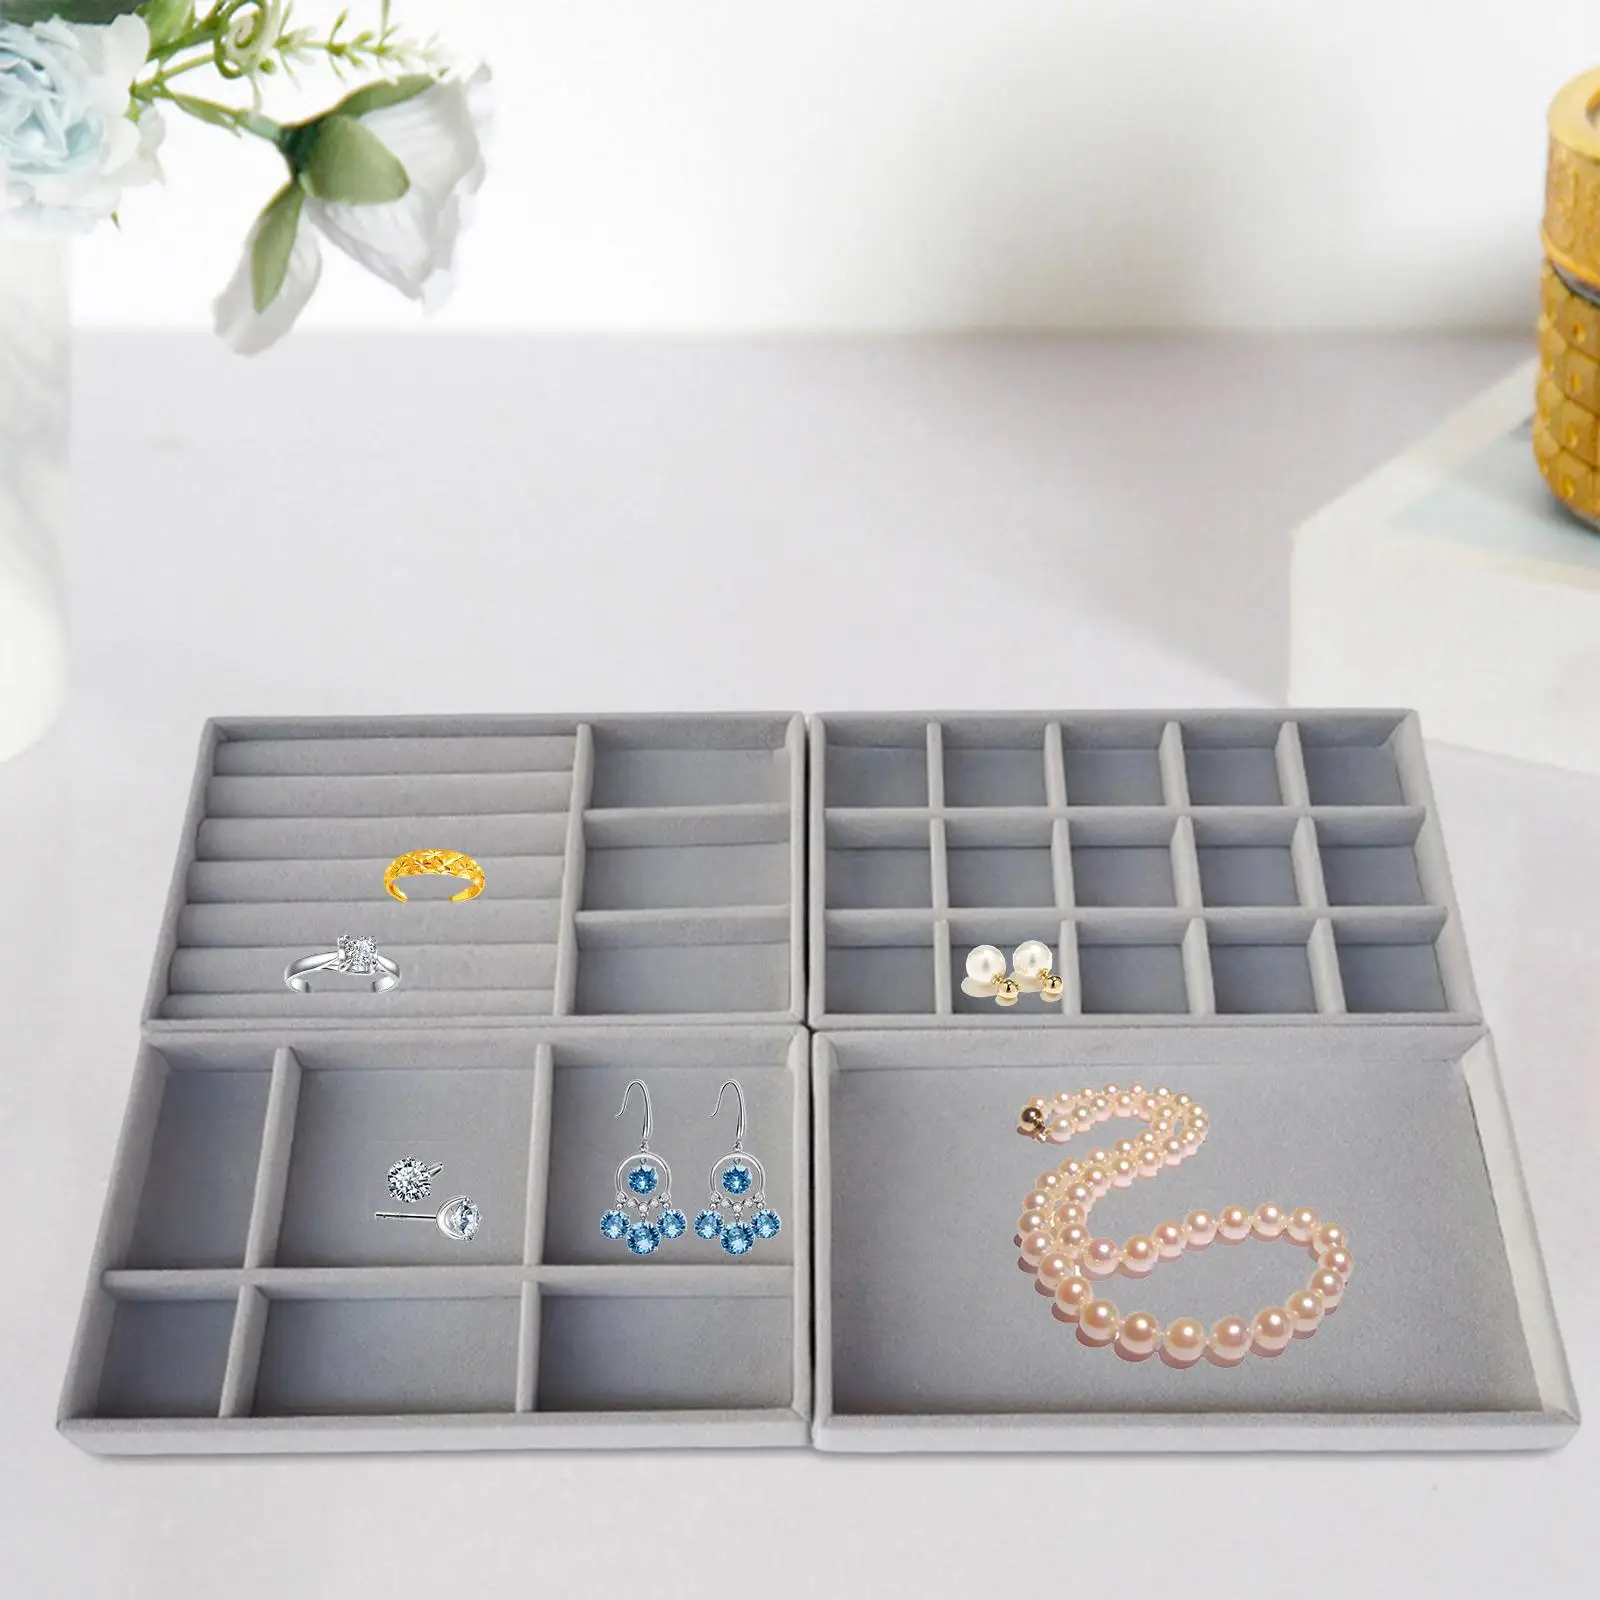 4Pcs Earrings Display Trays Women Gifts Trinkets Container Storage Case Organizer for Showcase Dresser Drawers Pendants Gadgets